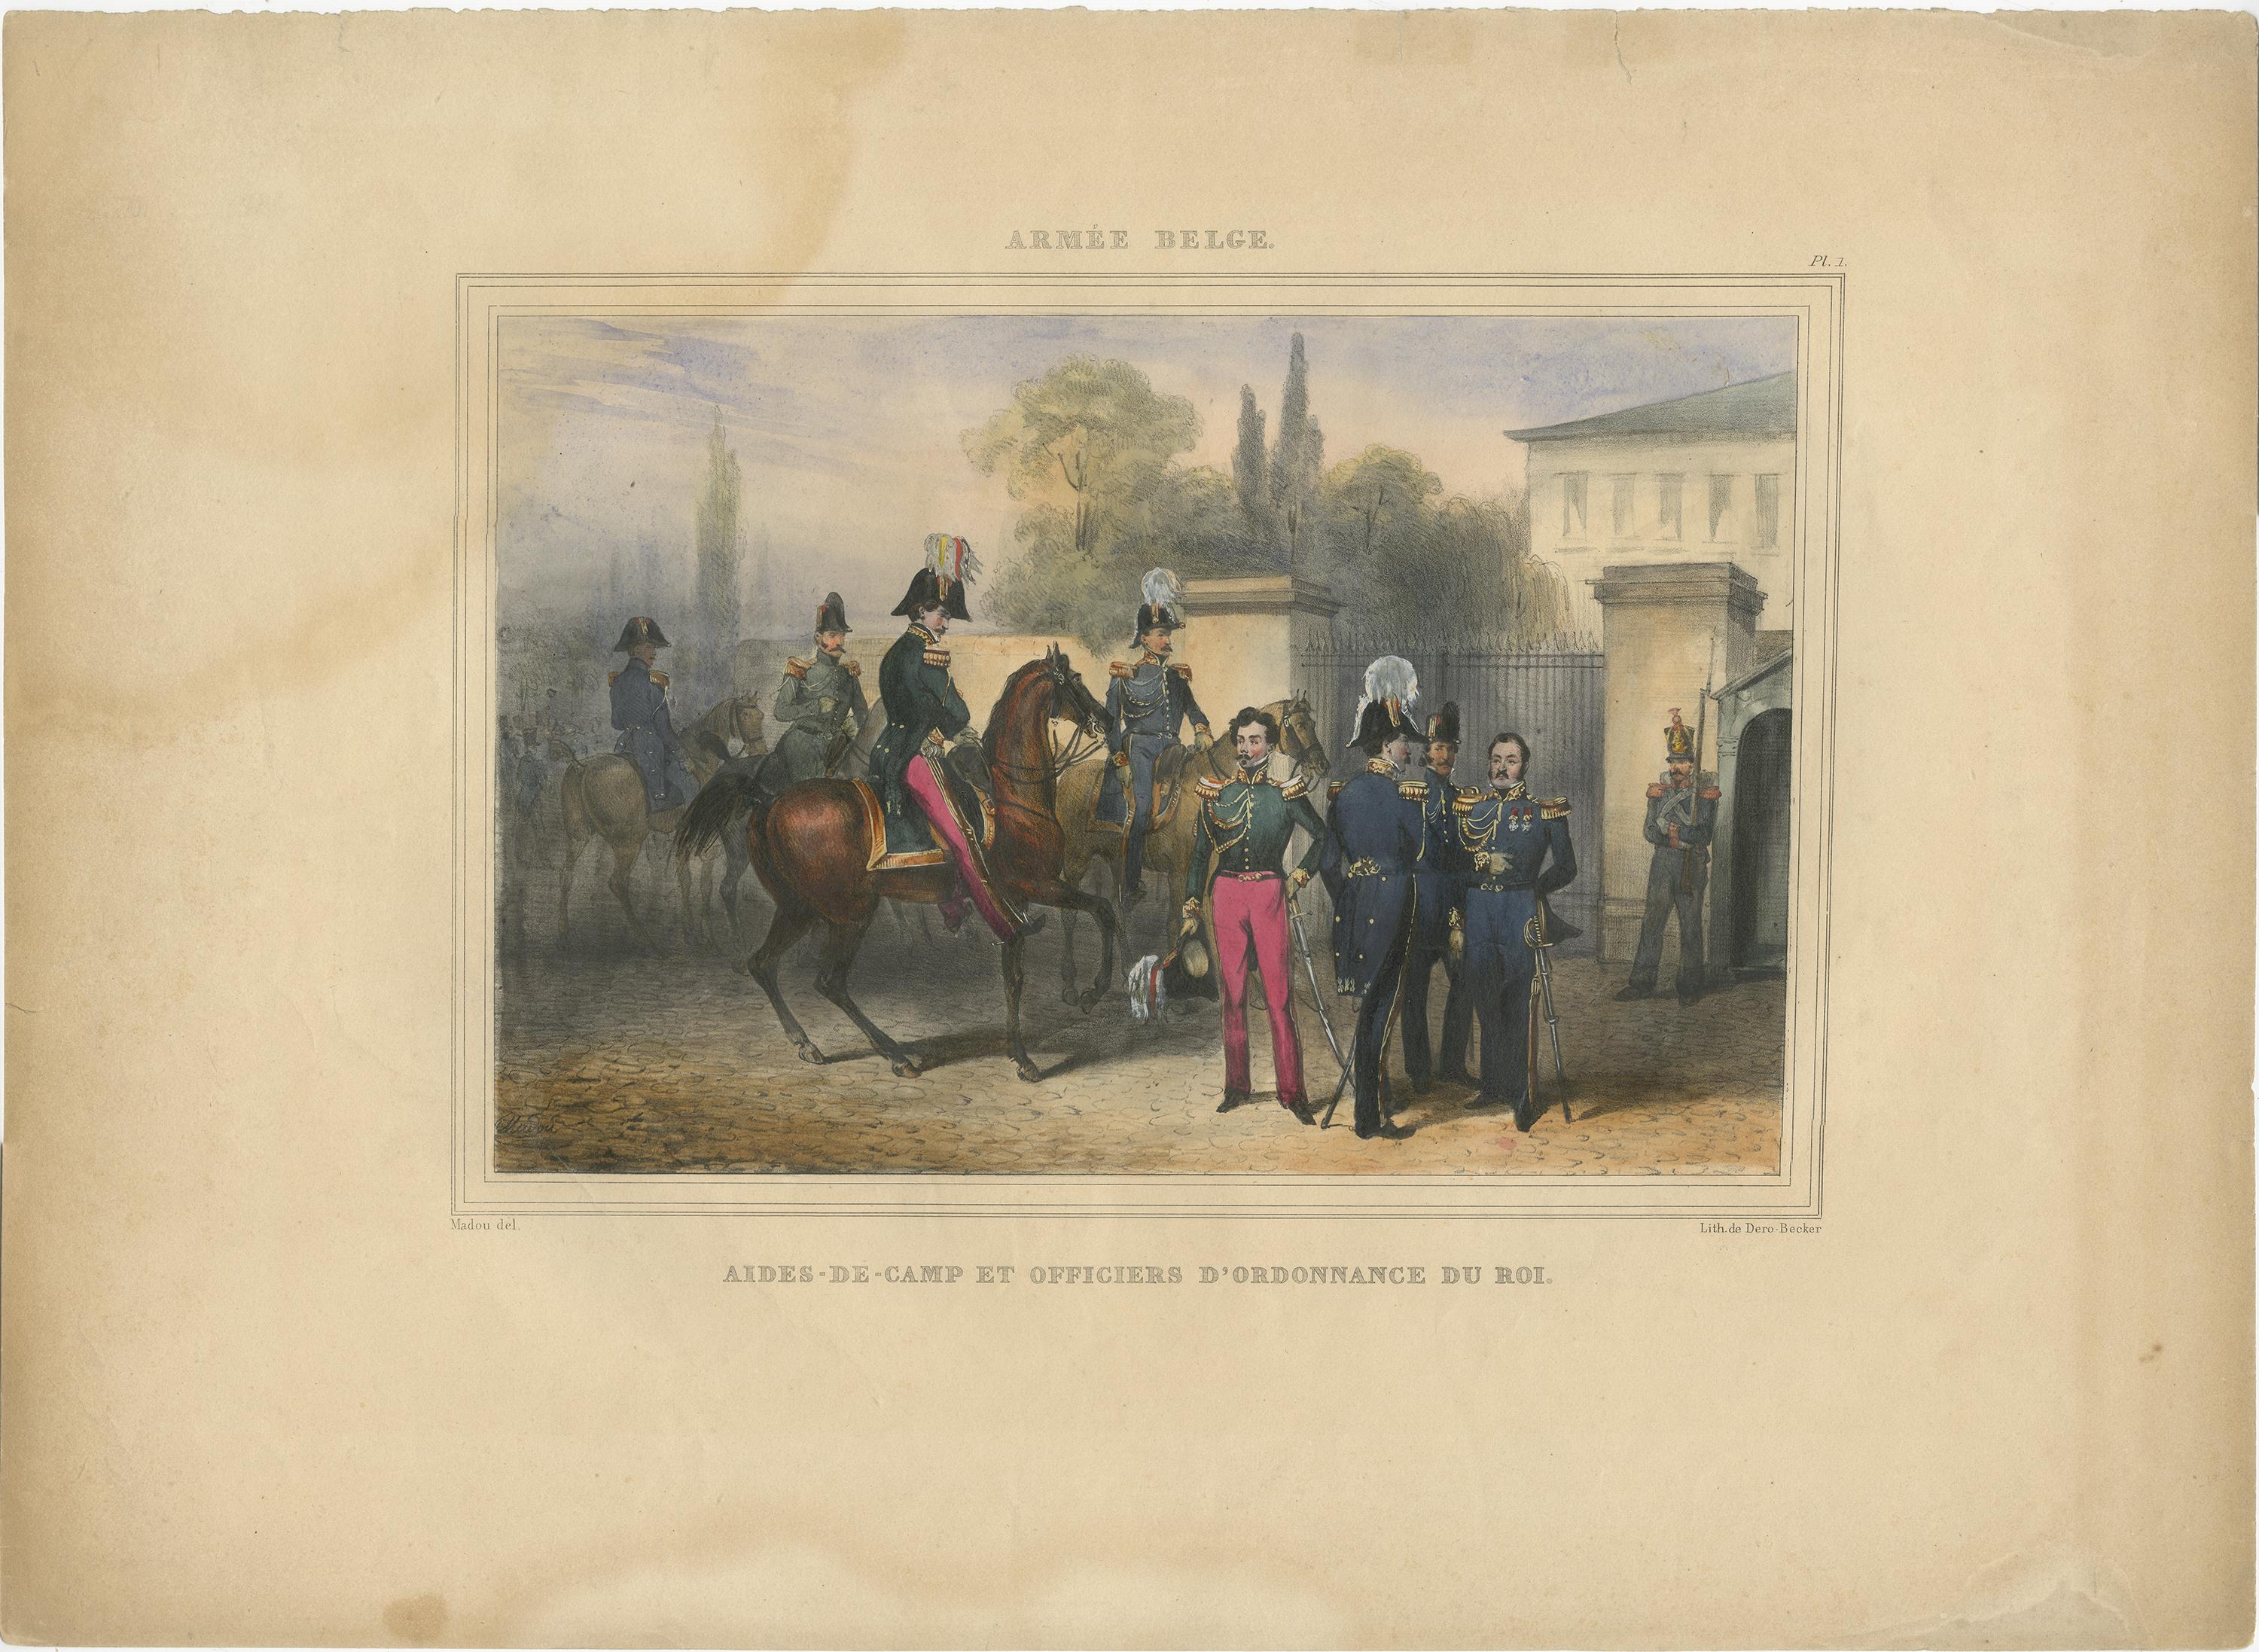 One nicely hand coloured print of an original serie of 23 plates, showing officers and soldiers discussing matters. published in 1833. Rare.

From a serie of beautiful lithographed plates with Belgian military costumes after Madou and printed by